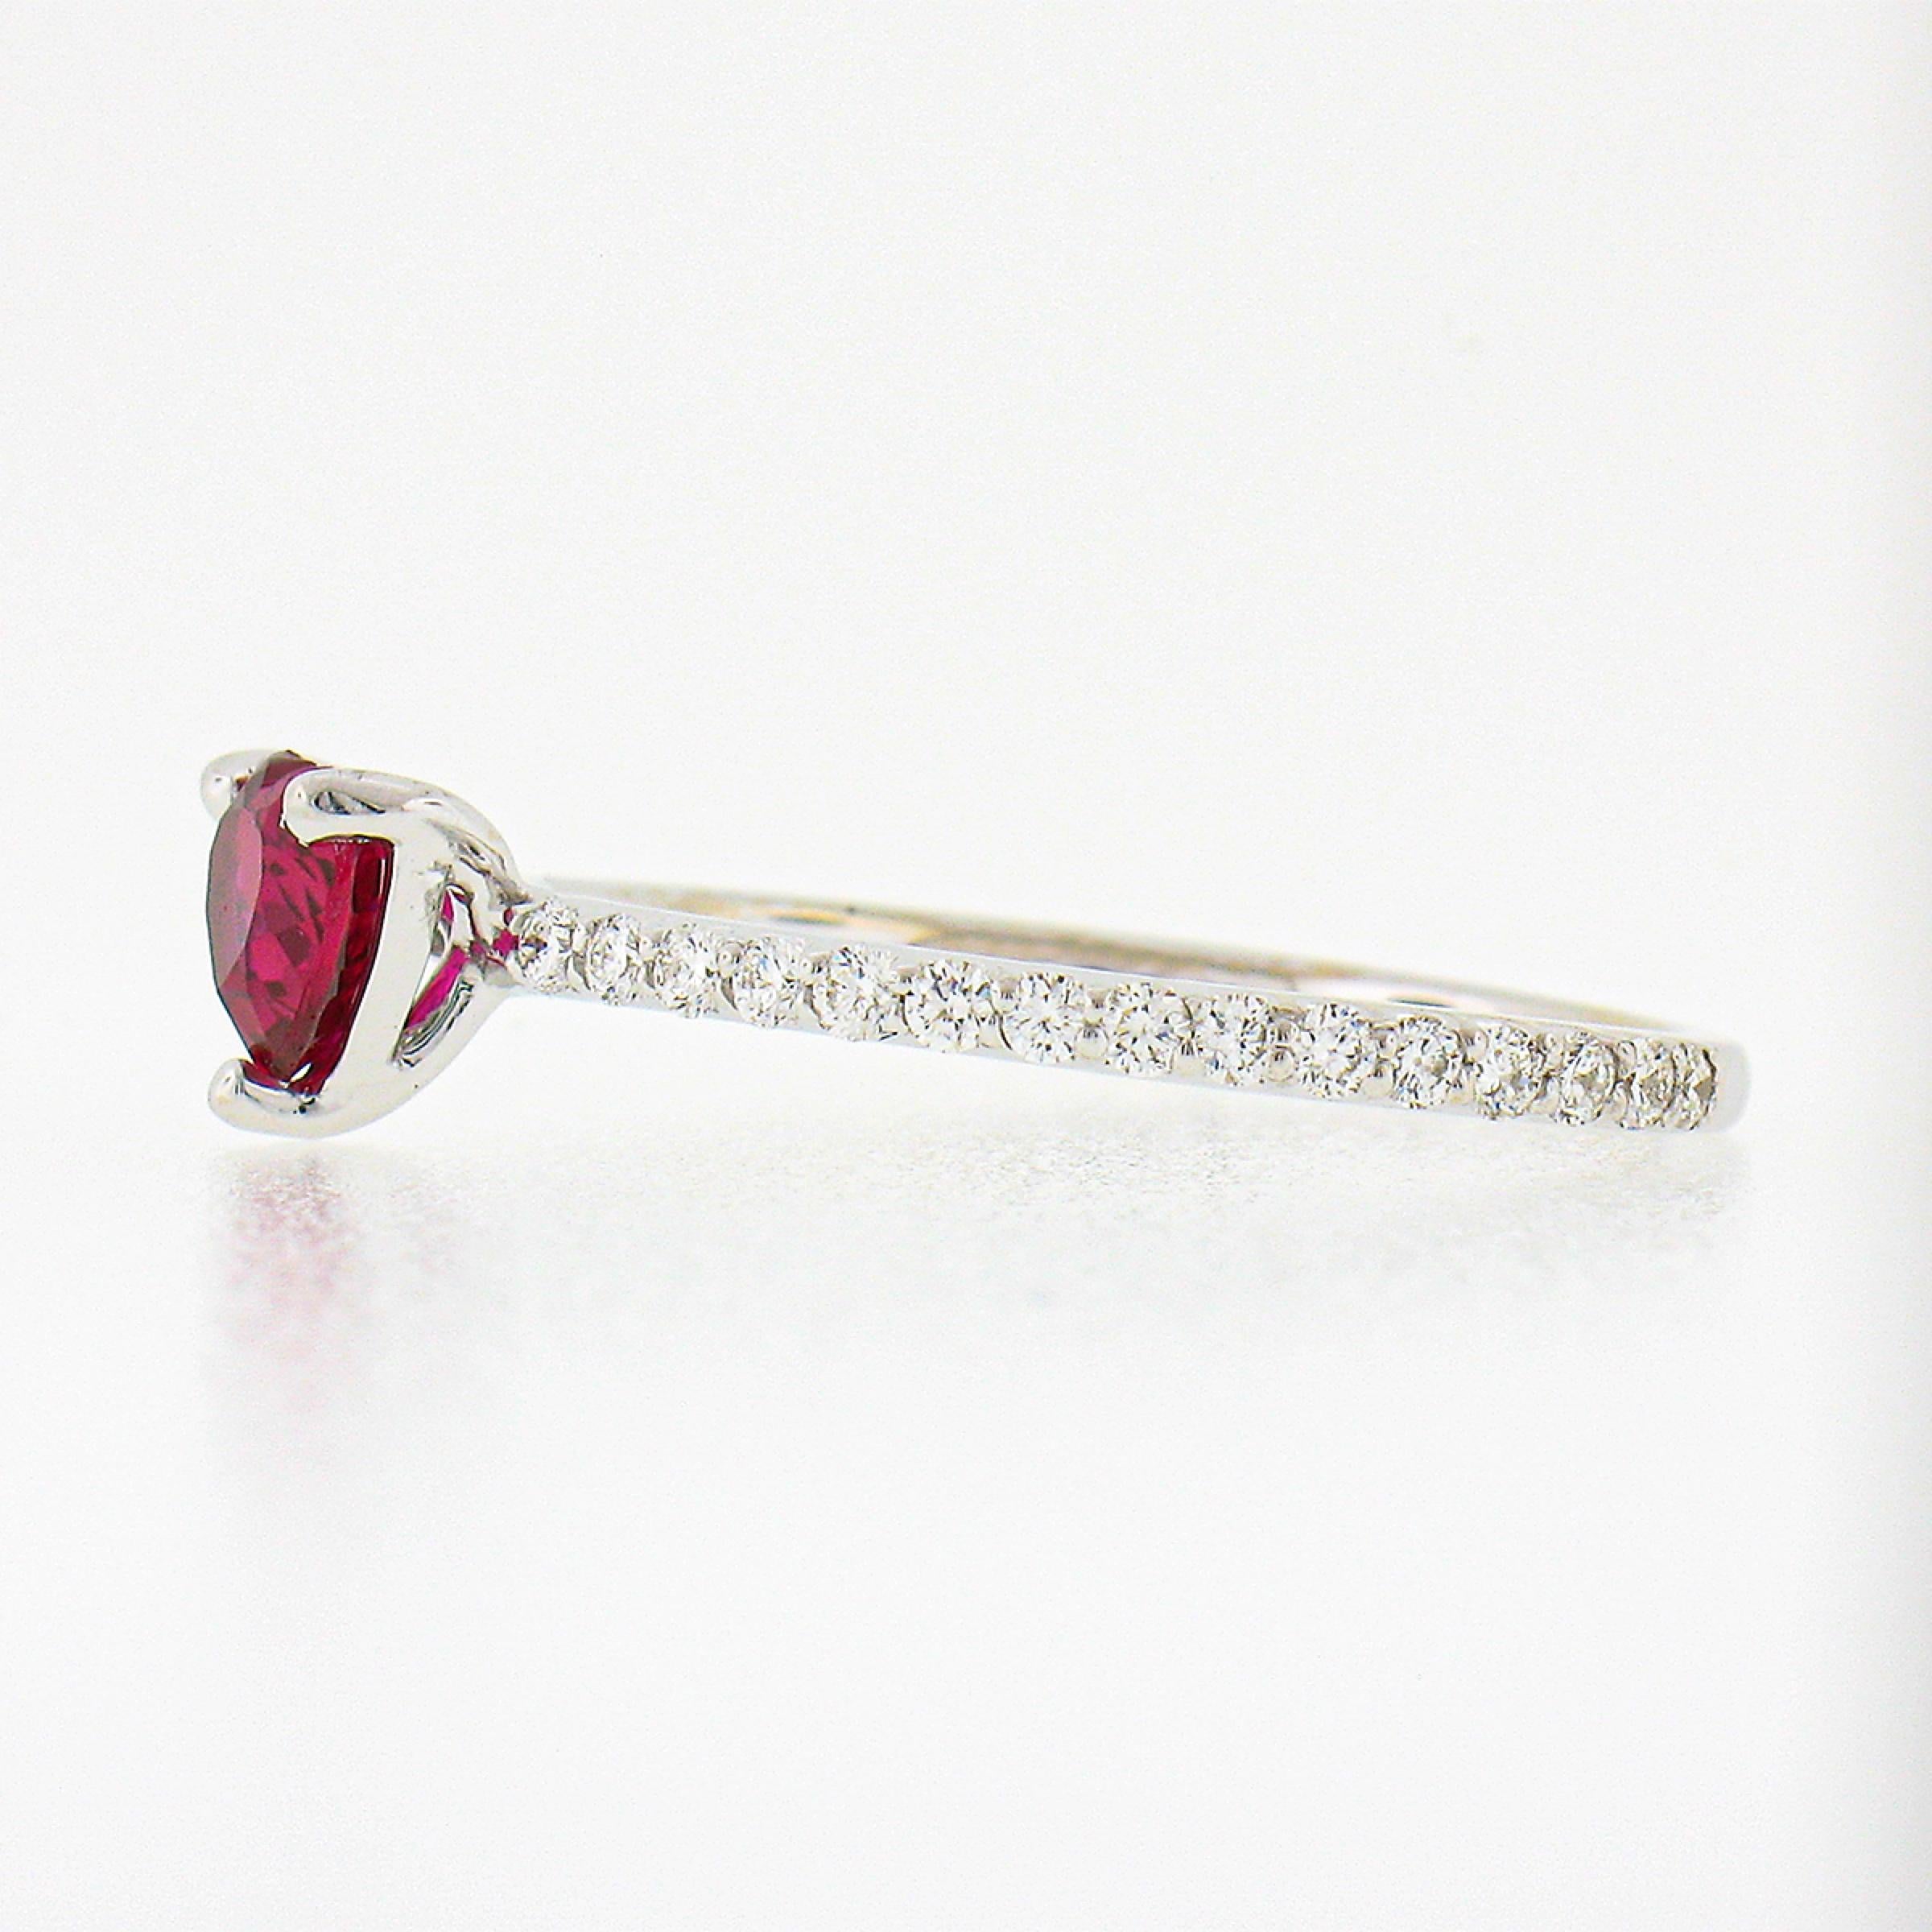 NEW 18k White Gold .95ct GIA NO HEAT Heart Ruby w/ Diamond Sides Engagement Ring 2